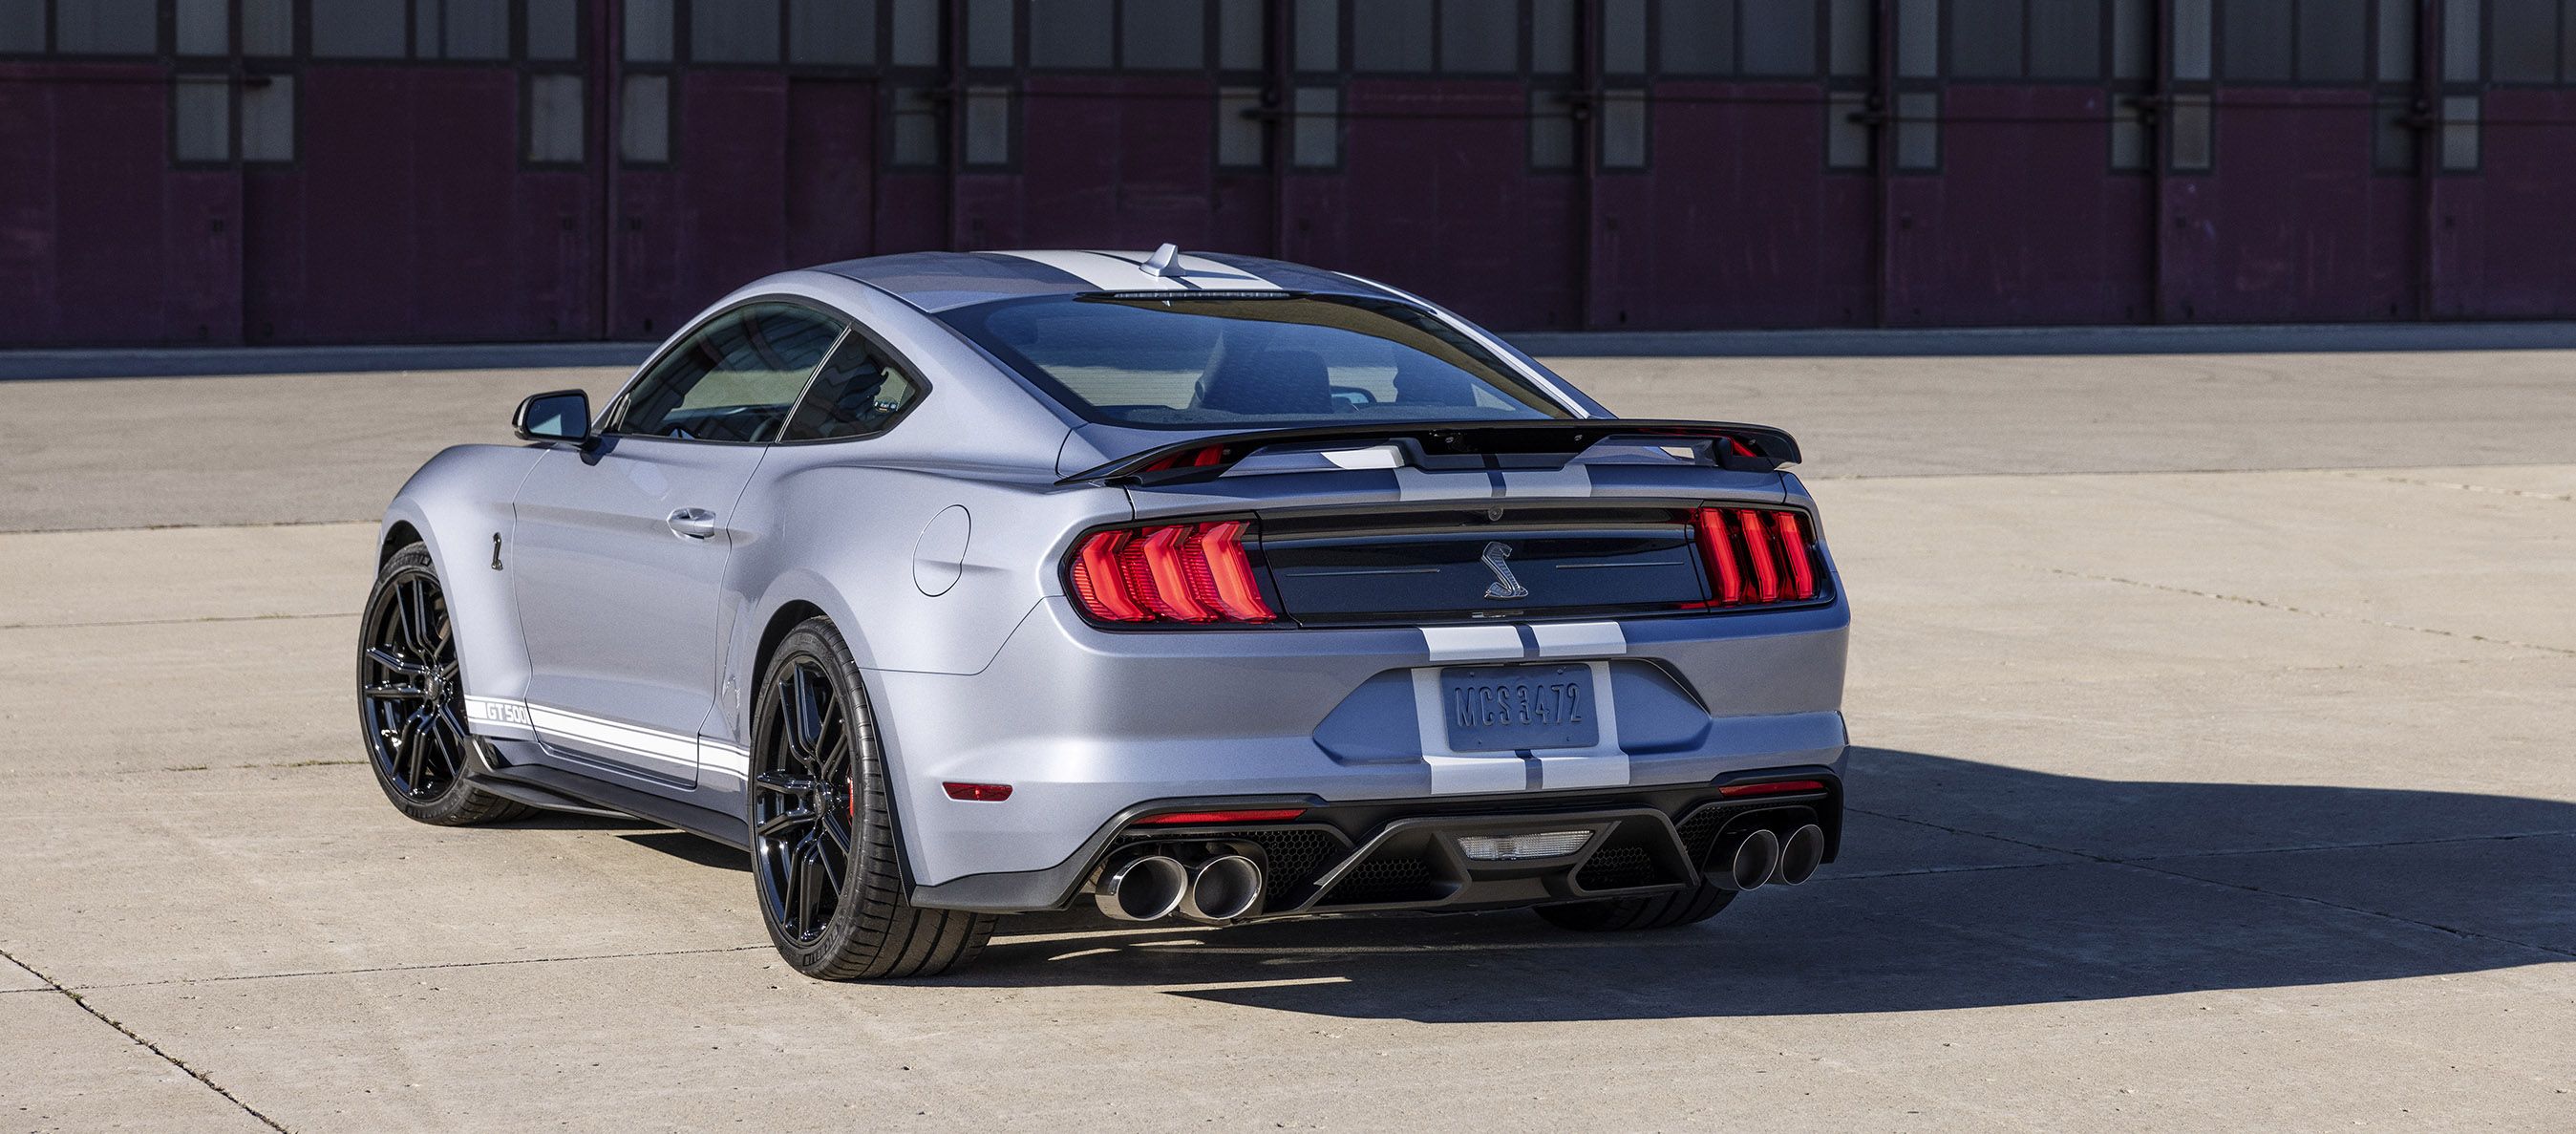 2022 Mustang Shelby GT500 Heritage Edition Image Gallery